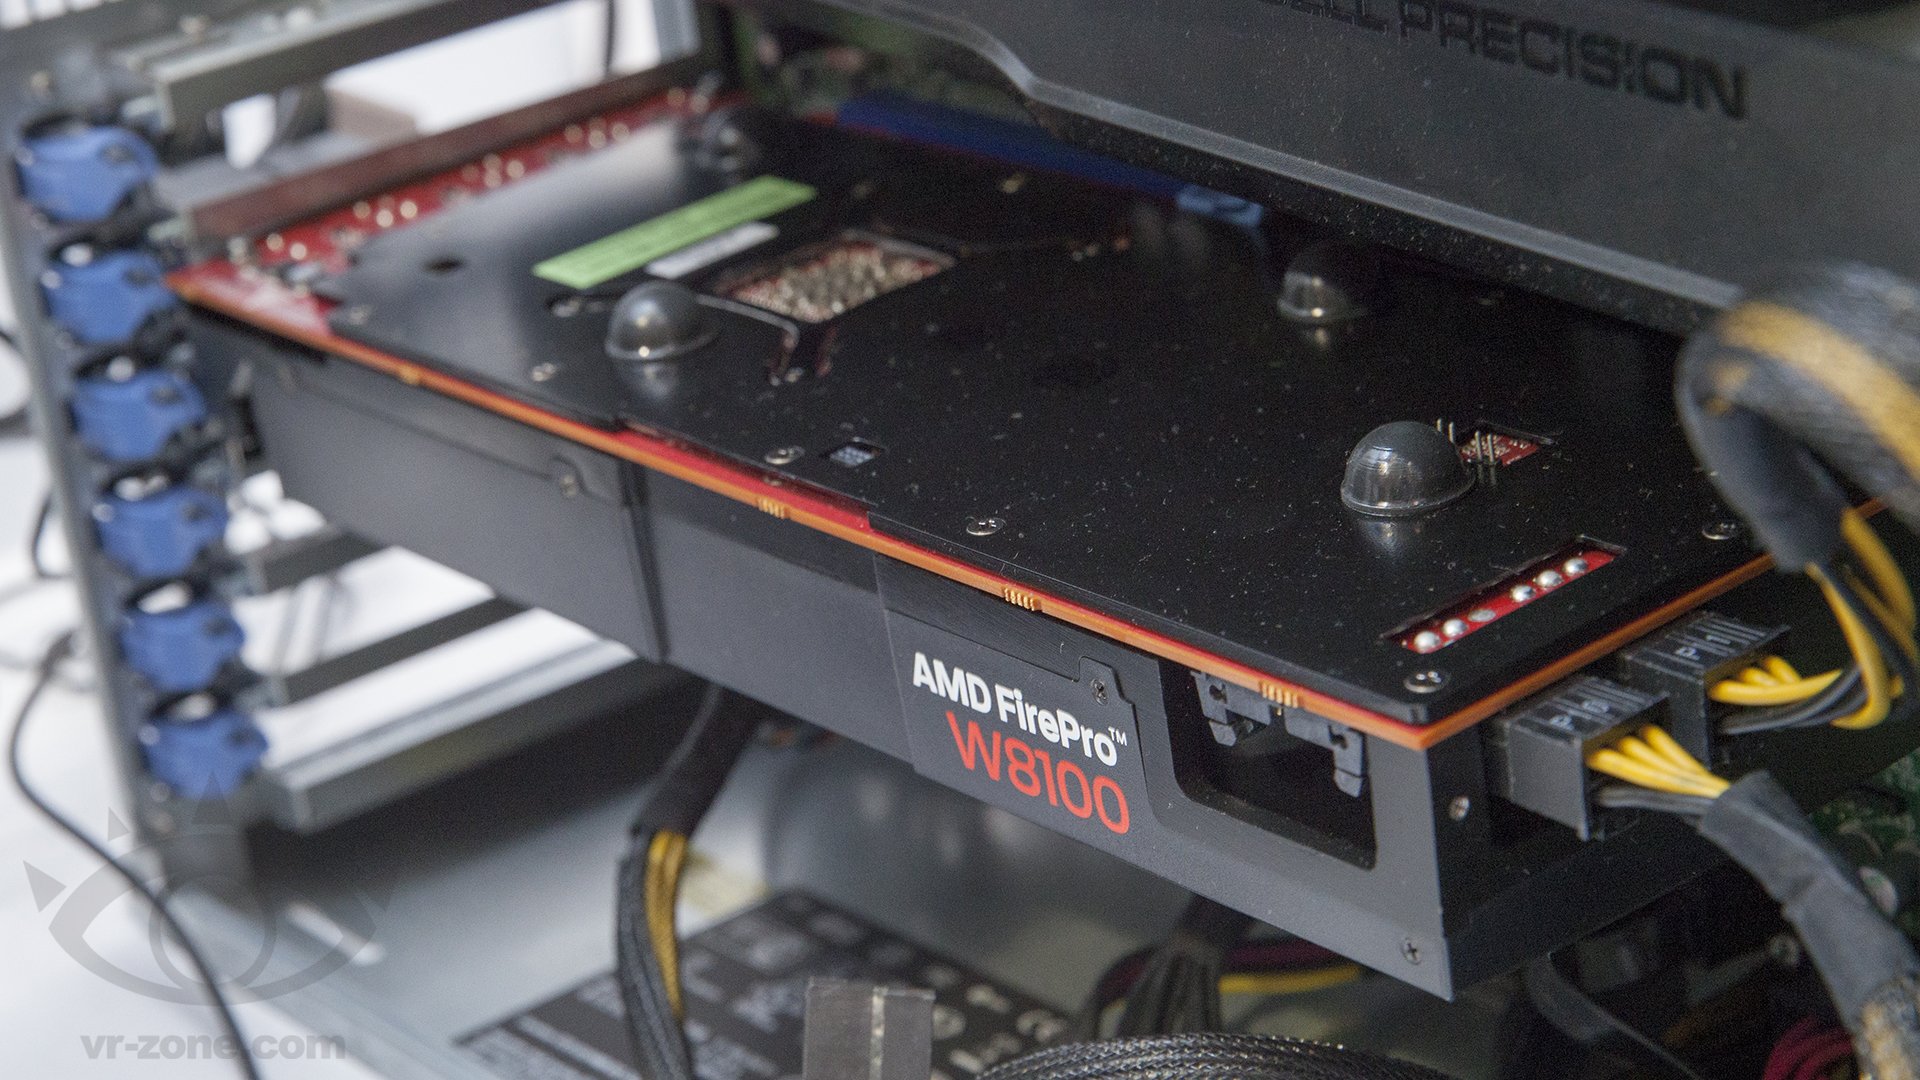 AMD FirePro W8100 spotted in the wild 